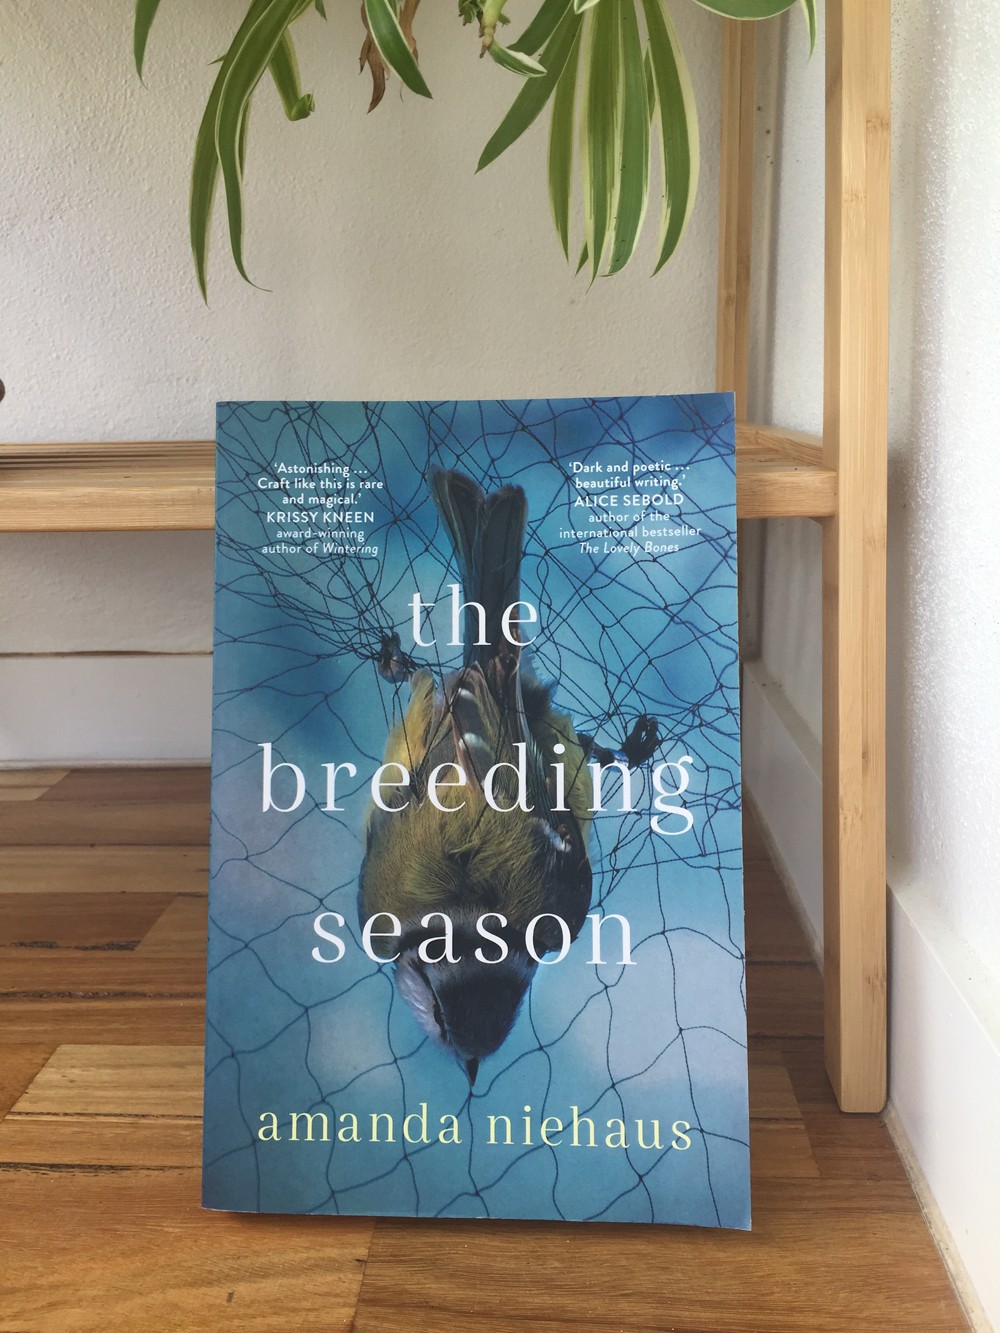 The cover of The Breeding Season by Amanda Niehaus the cover is blue and shoes a green and grey bird caught in netting